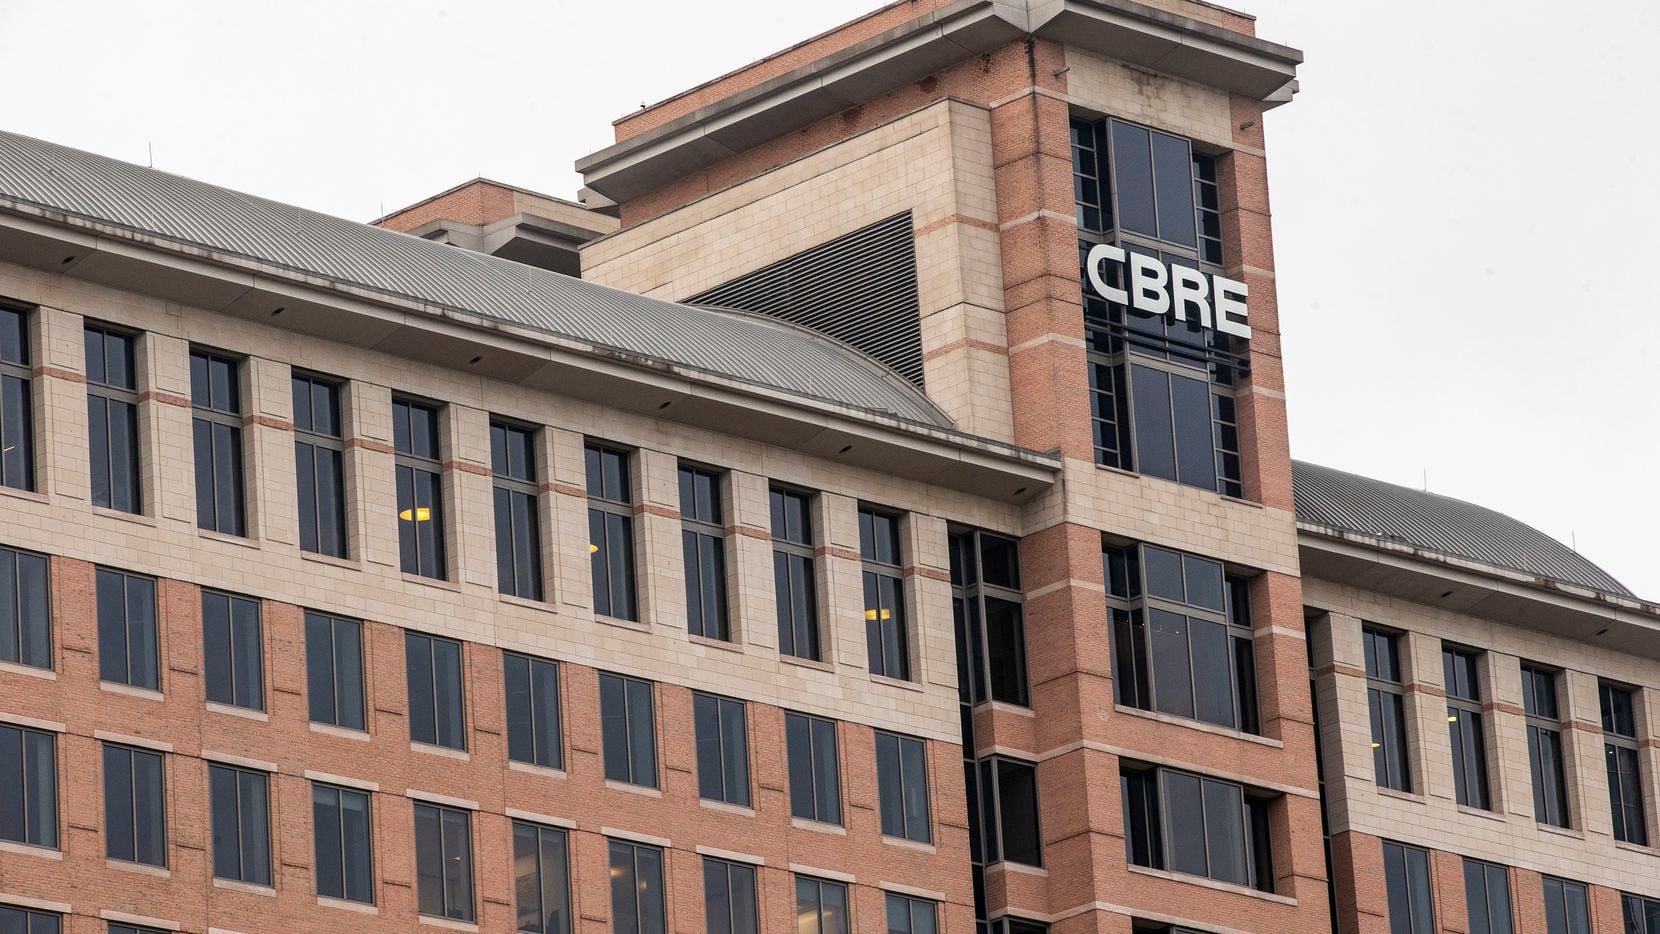 CBRE — the country’s largest commercial real estate company — moved its head offices to Dallas in 2020.